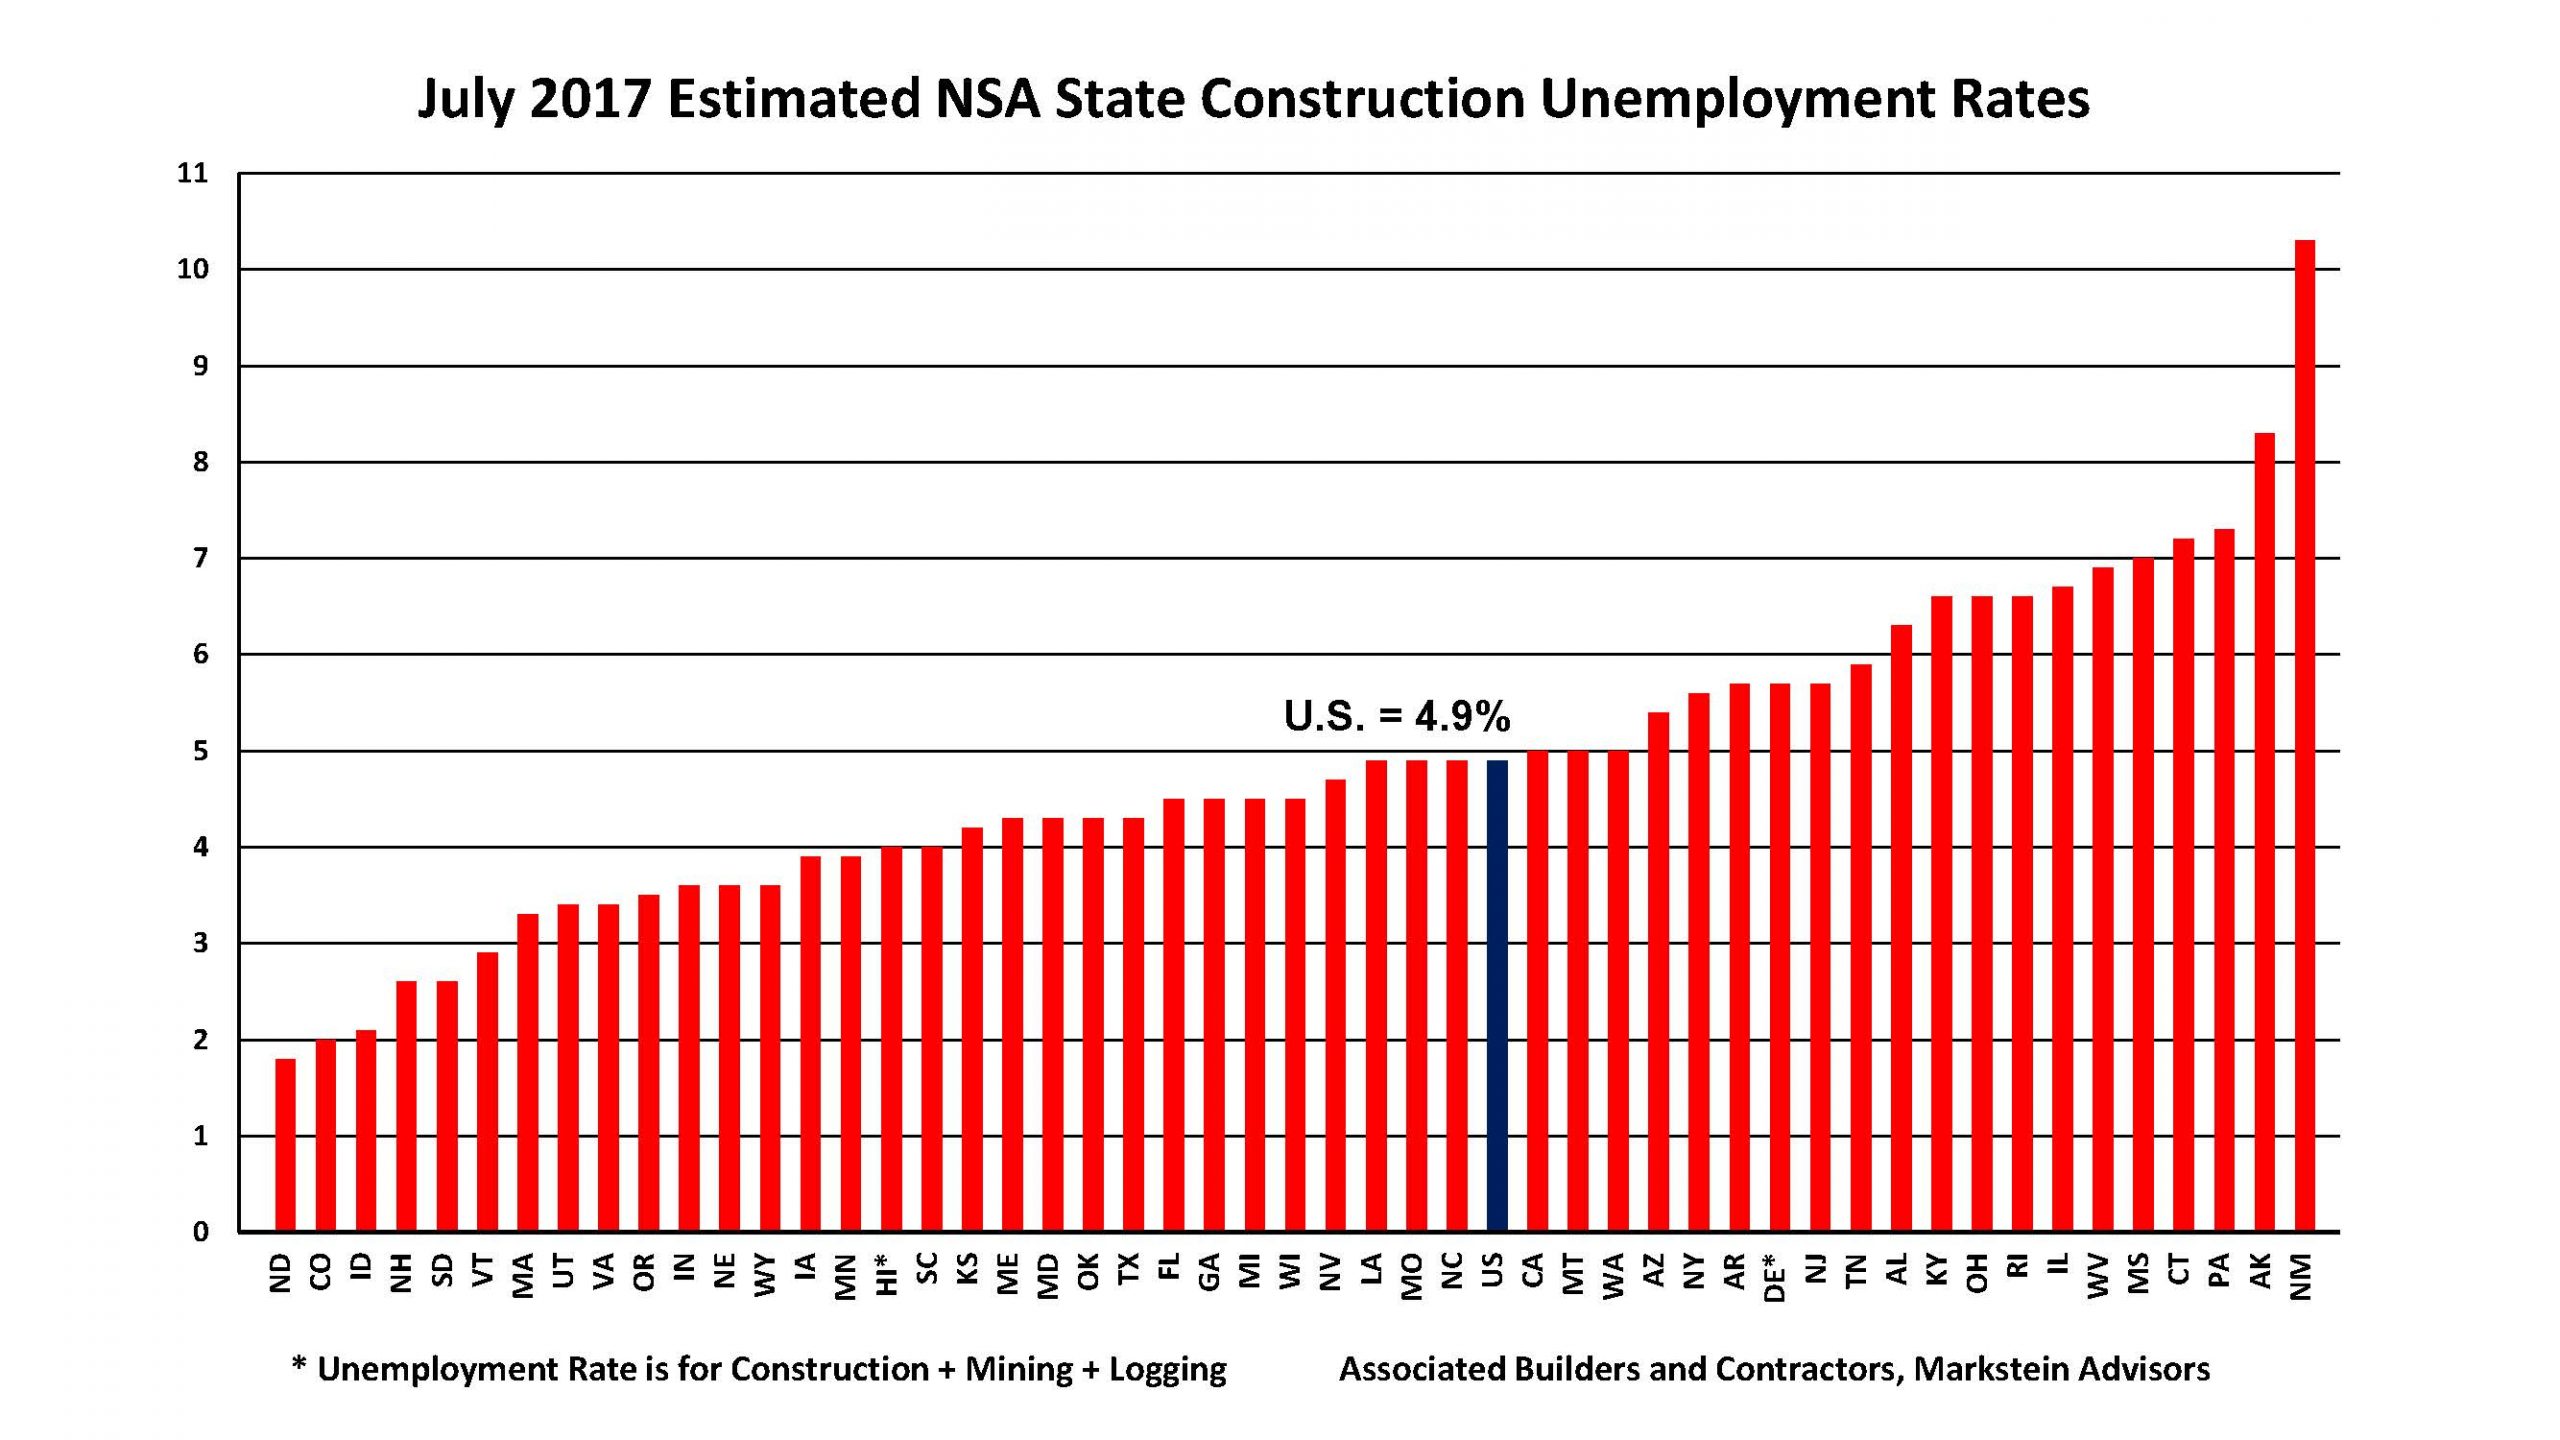 National Construction Unemployment Rate Ticks Up to 4.9 Percent in July